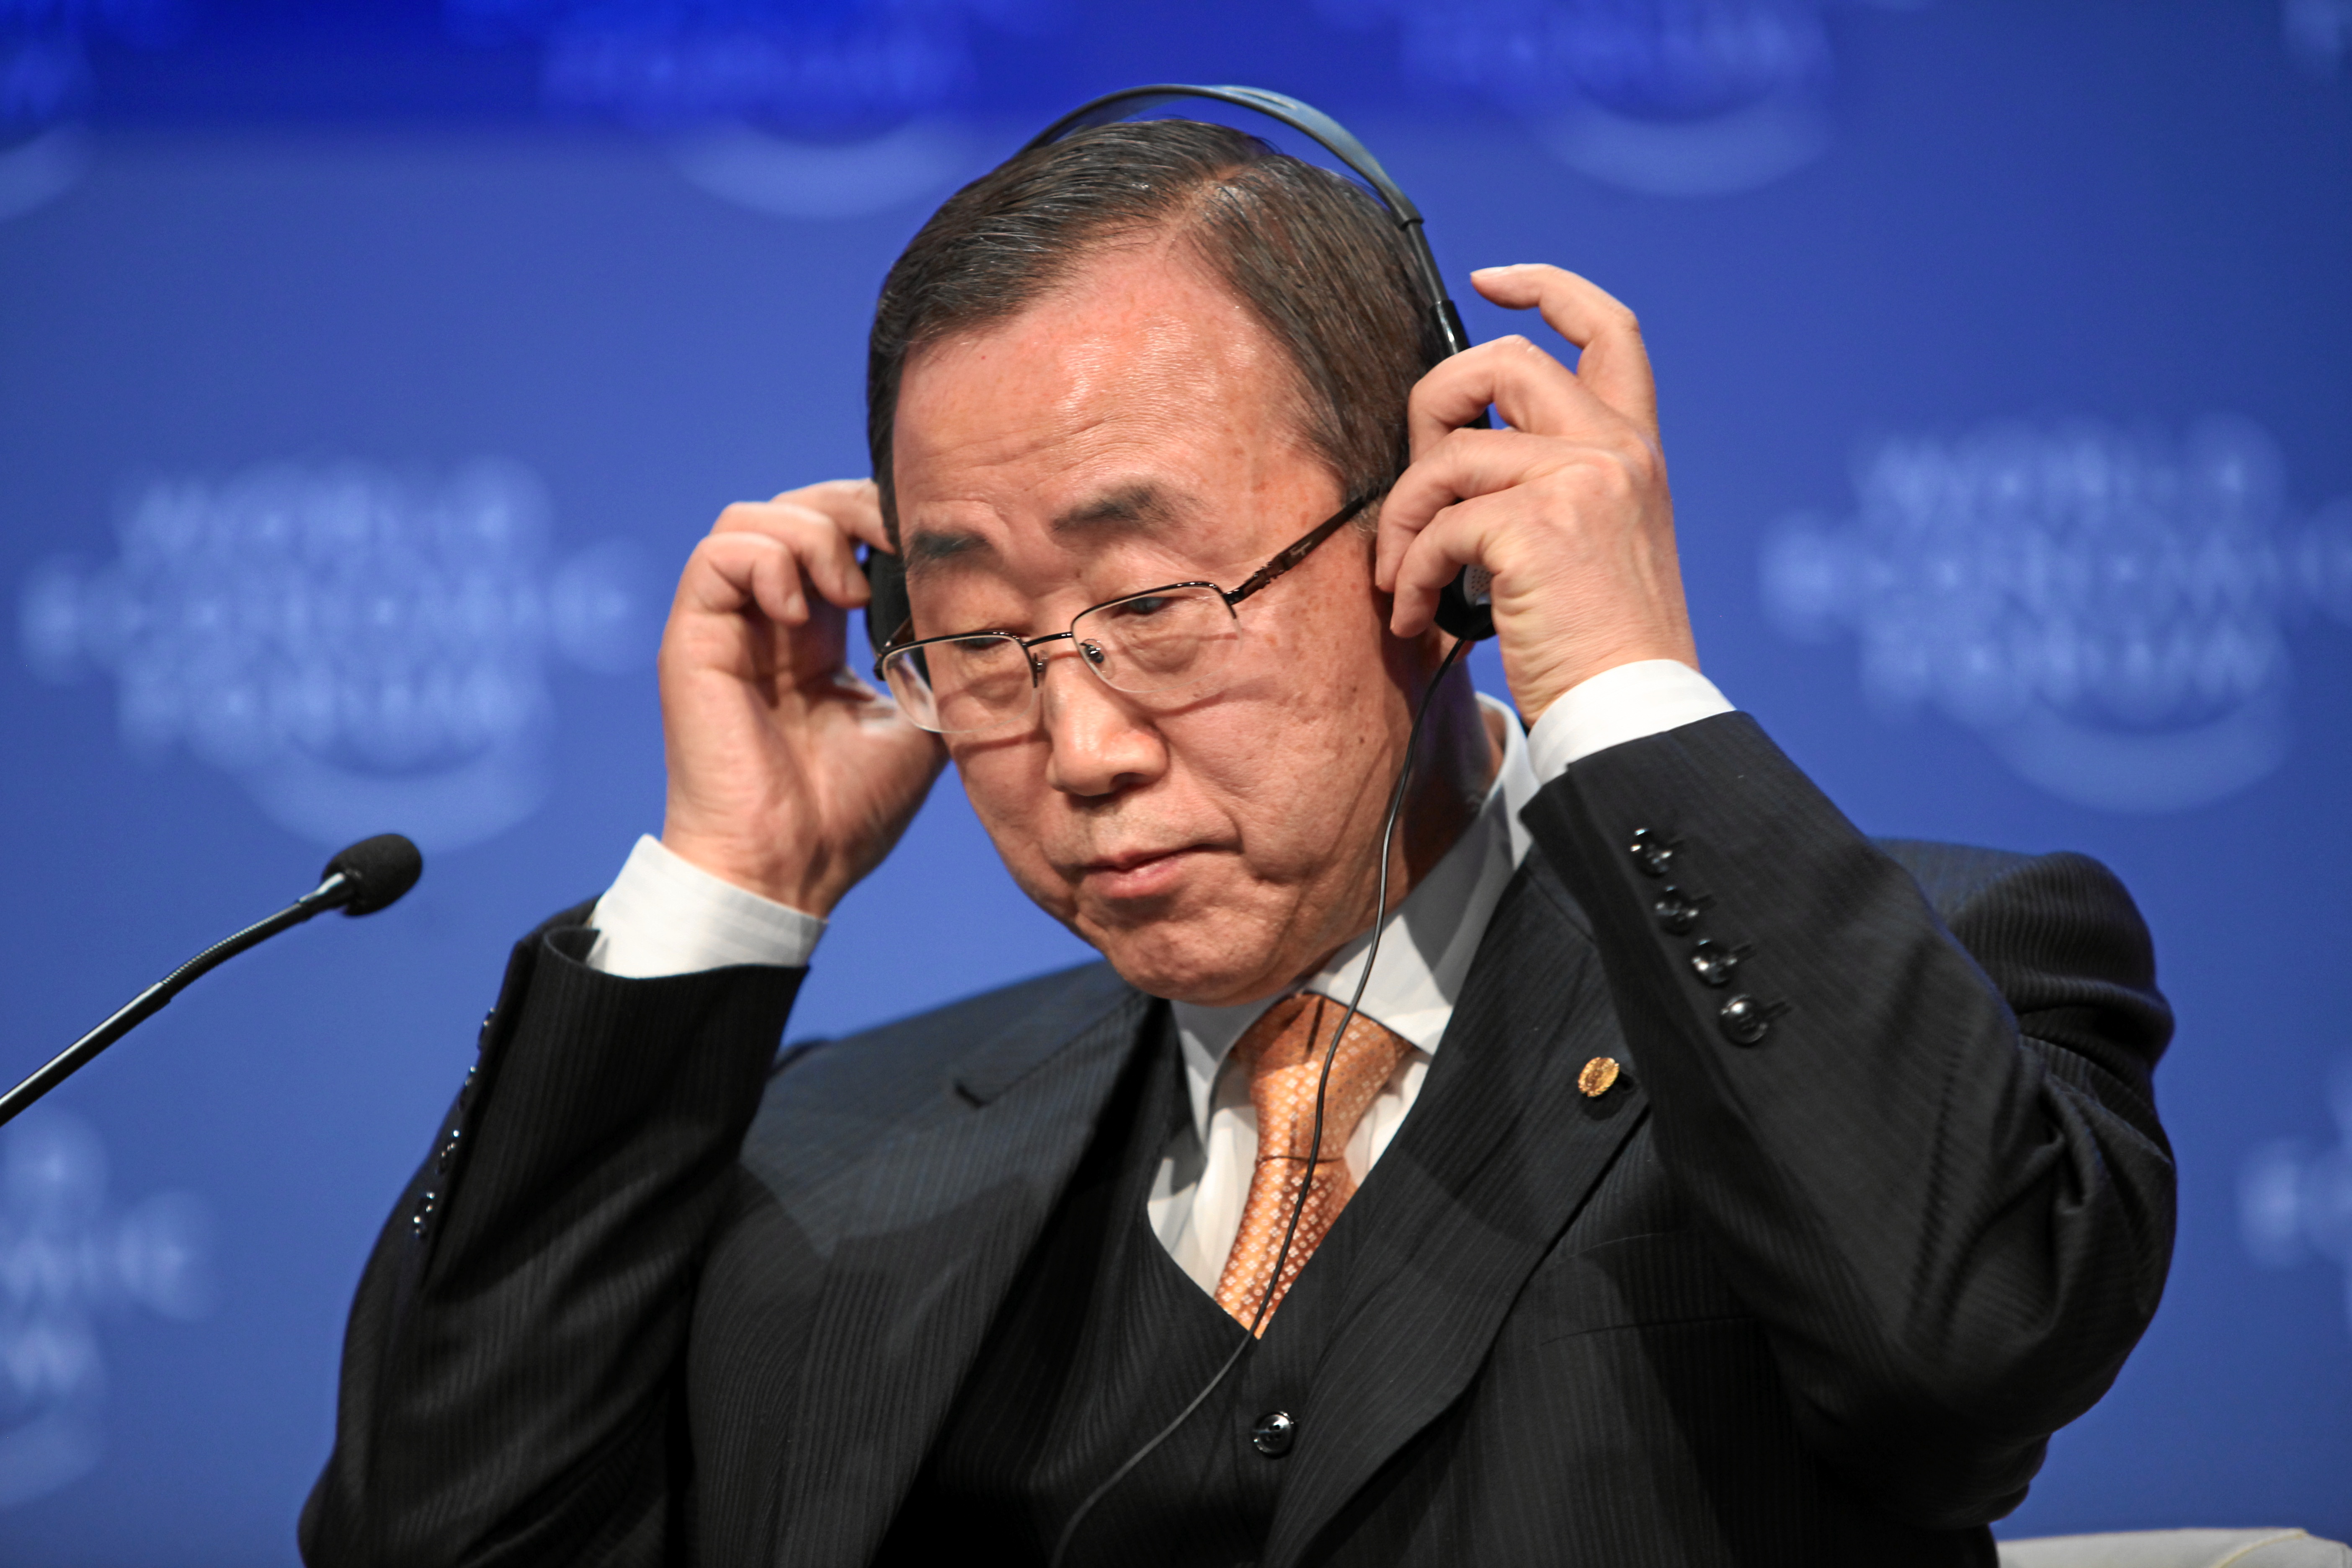 UN chief cheers latest Gaza truce, urges long-term deal